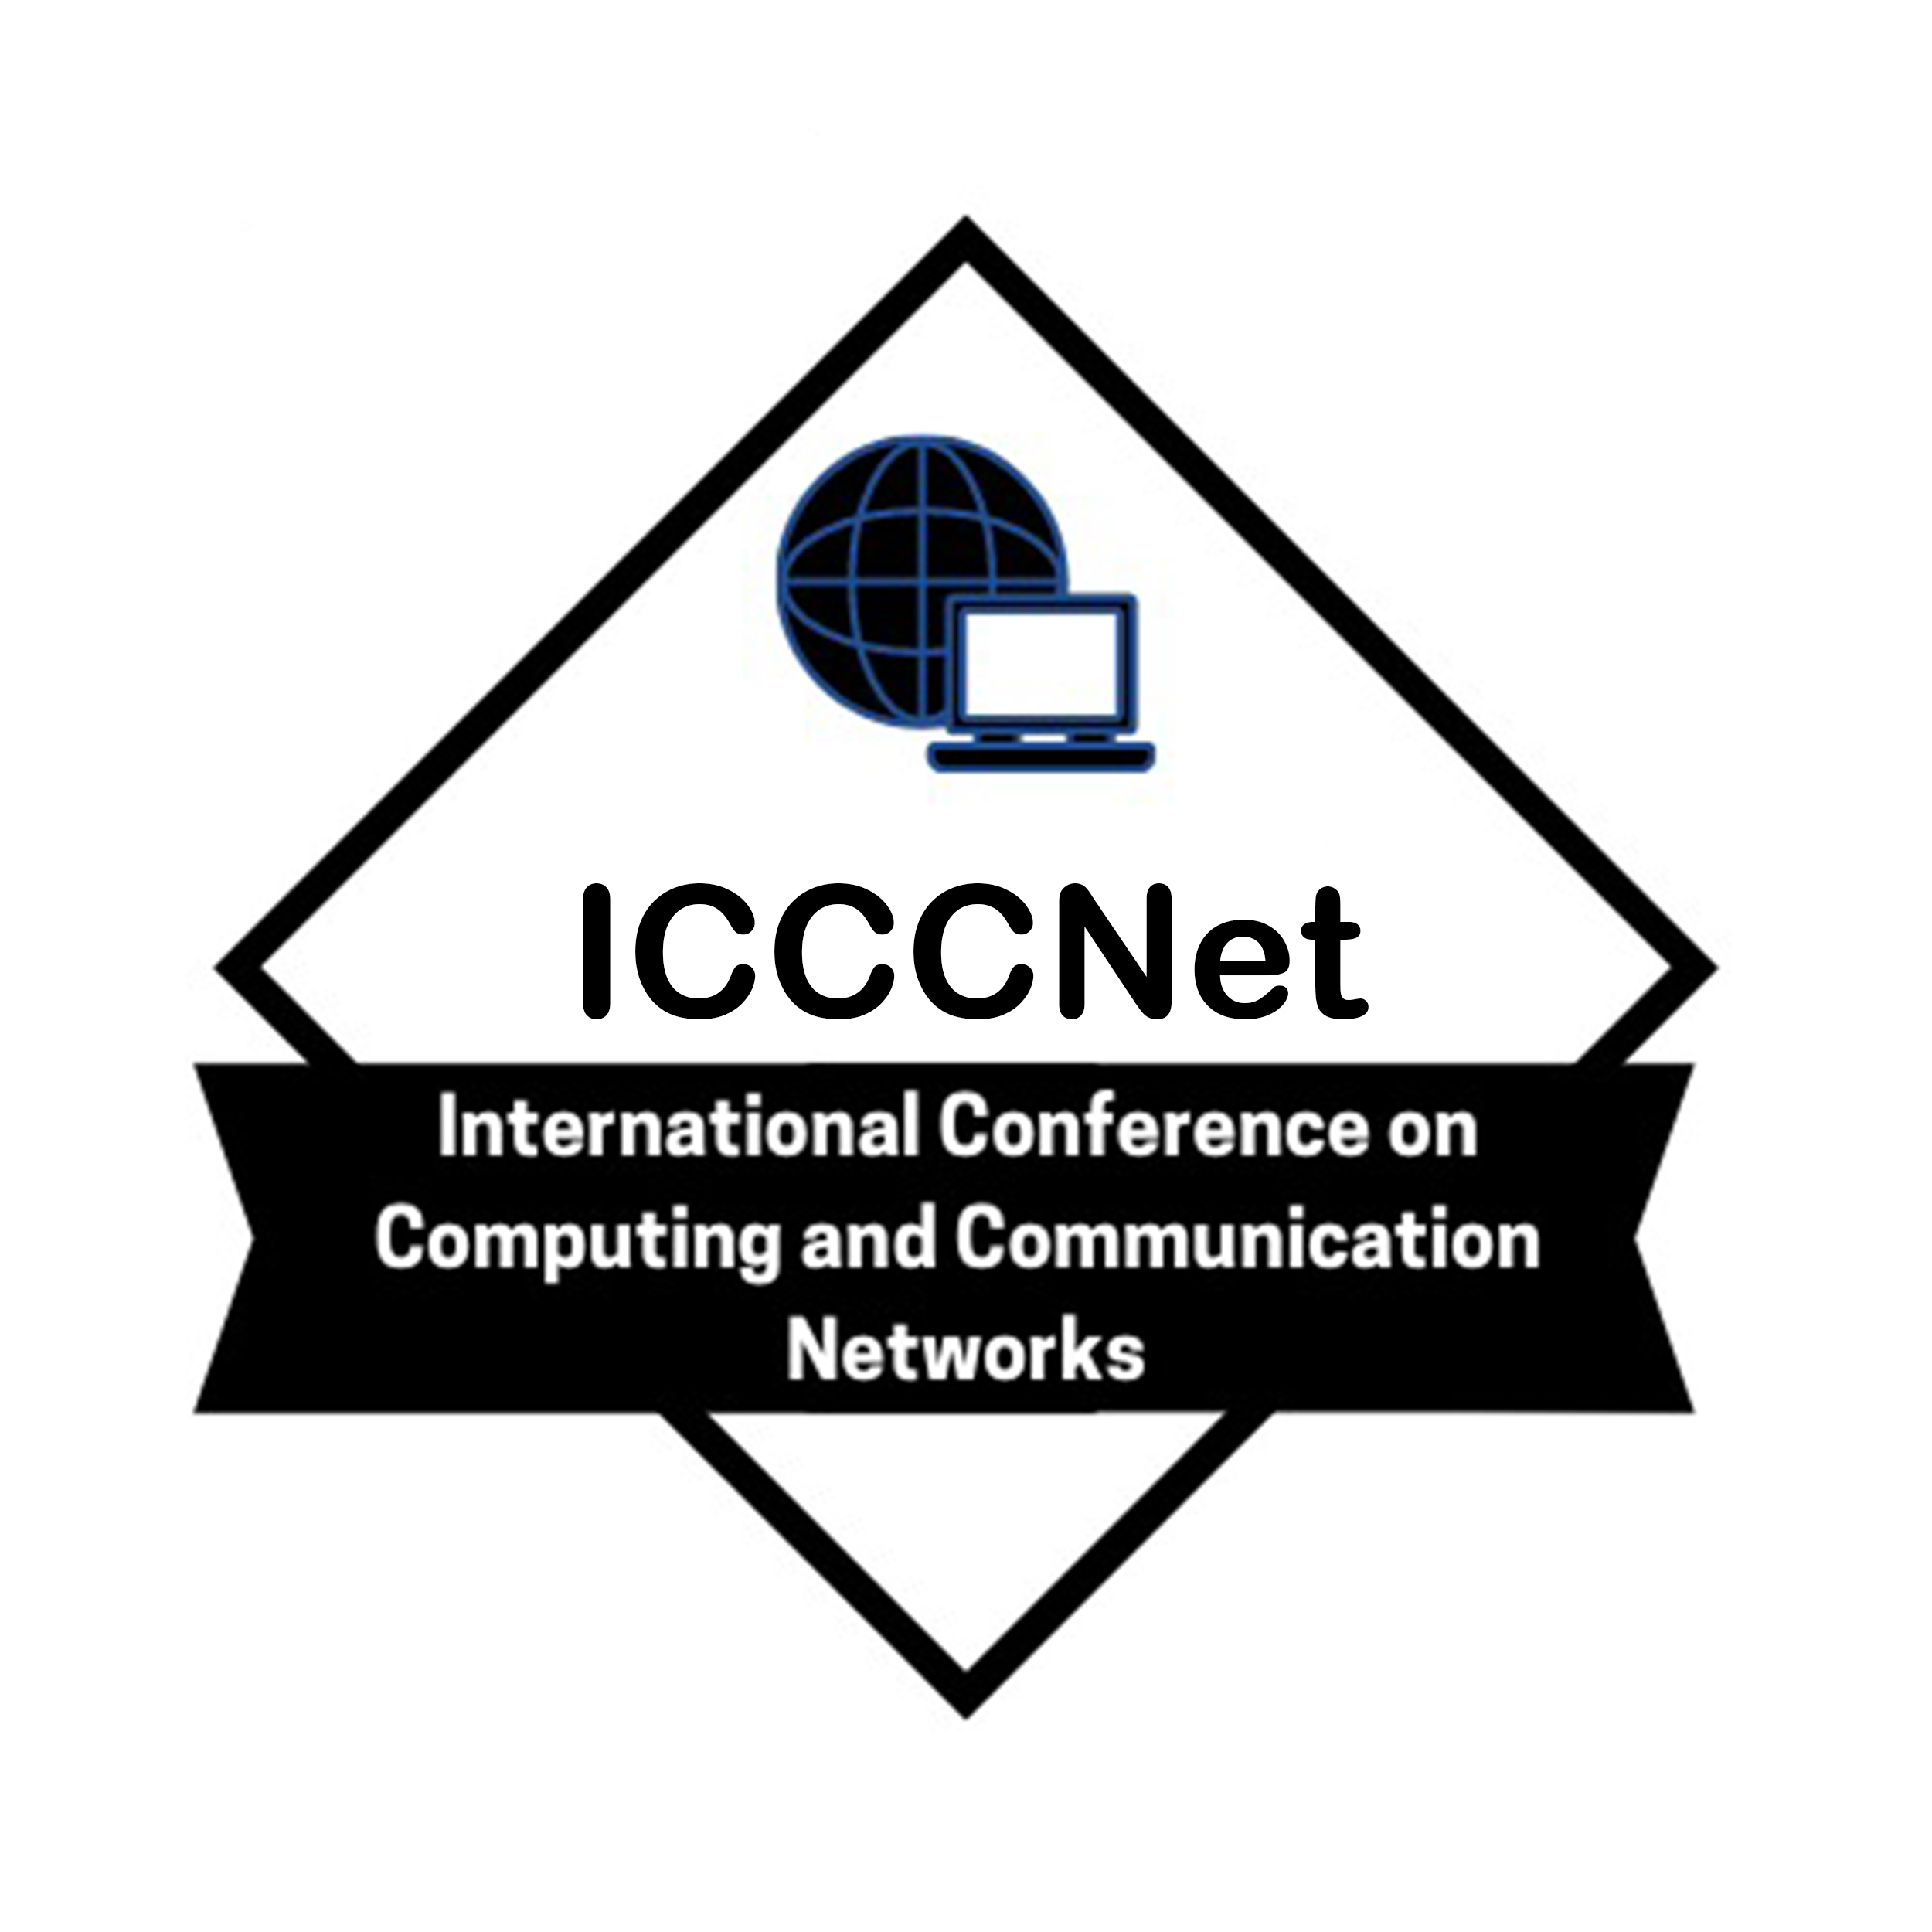 International Conference on Computing and Communication Networks (ICCCN